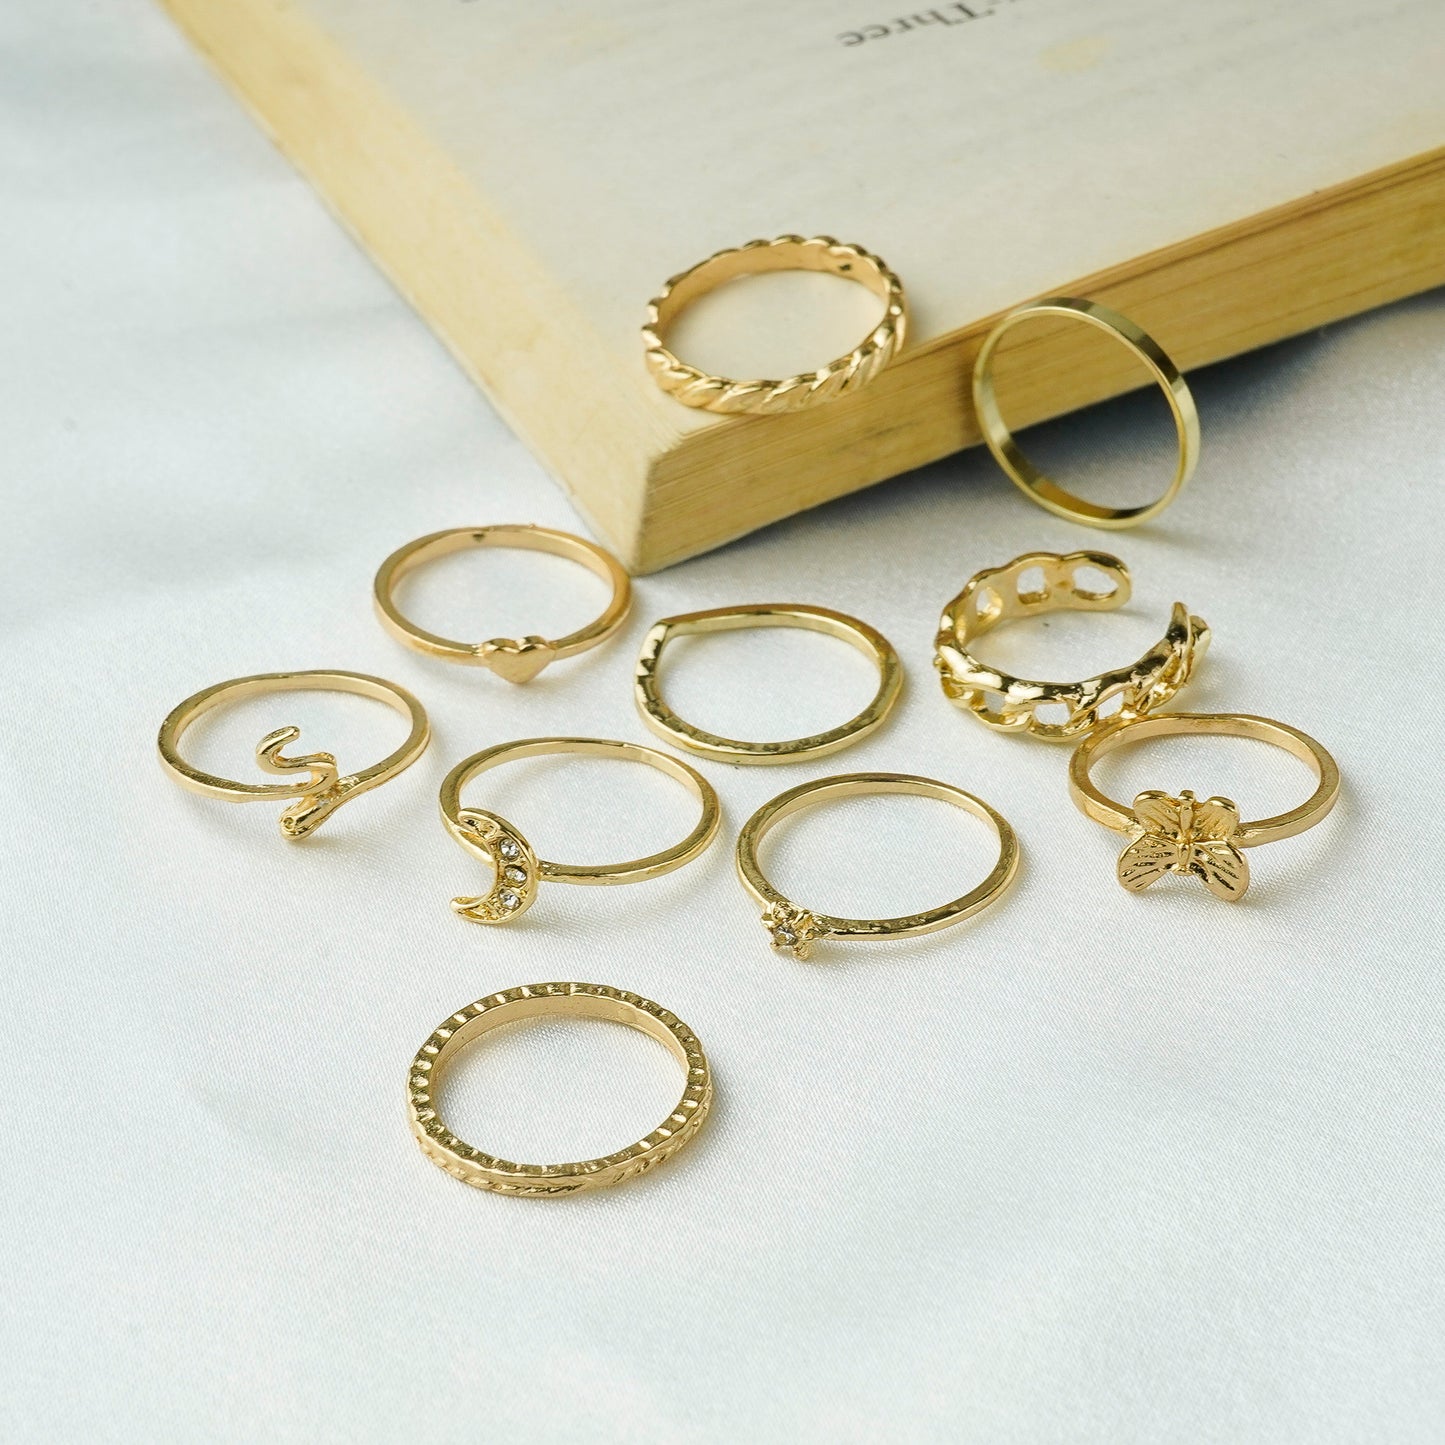 Trendy Set Ring For Fashionable Women(Code:R49)